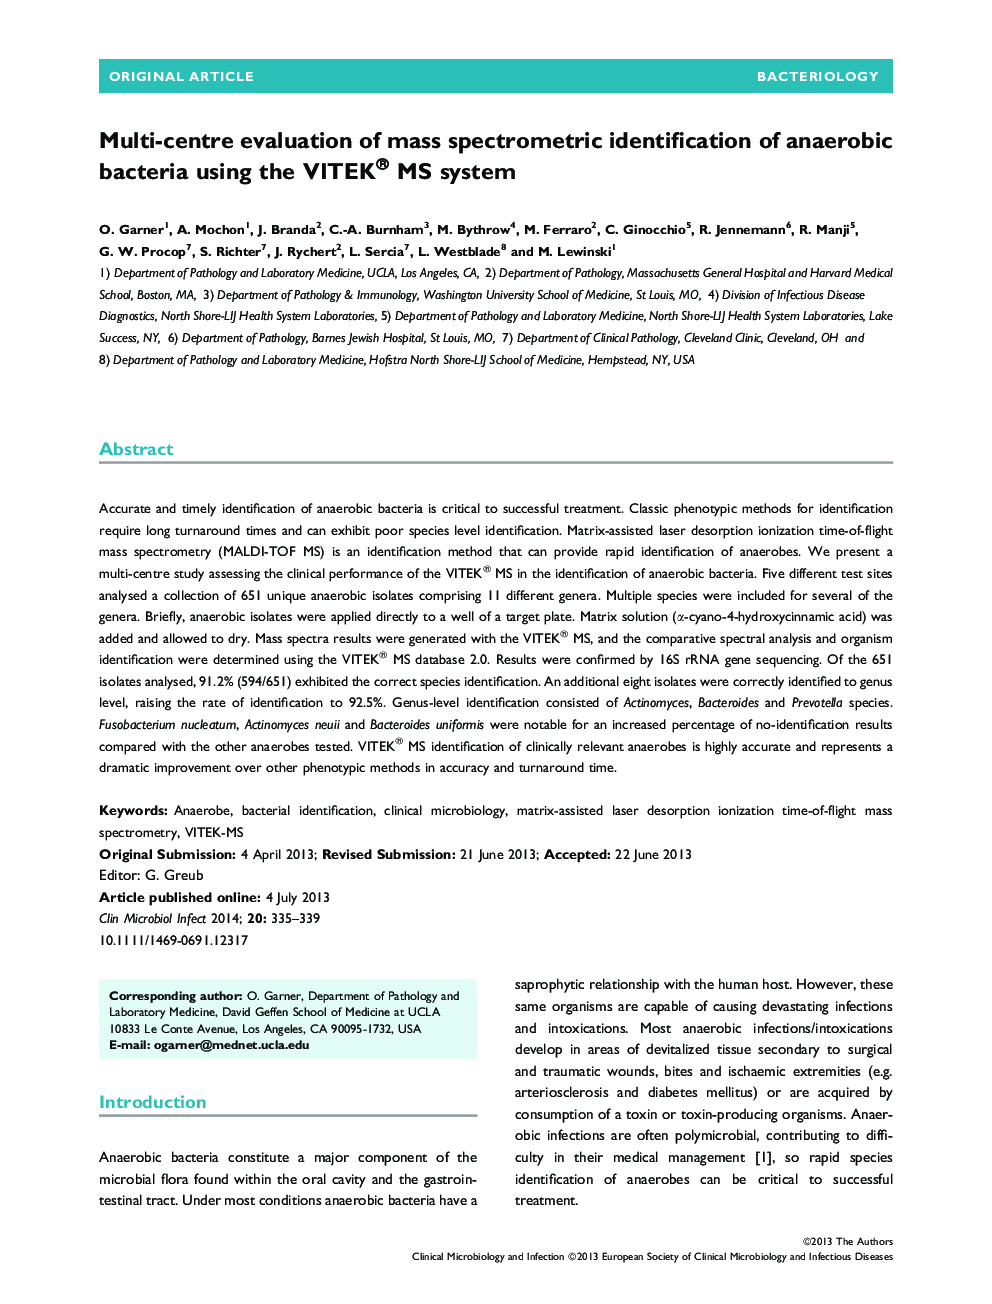 Multi-centre evaluation of mass spectrometric identification of anaerobic bacteria using the VITEK® MS system